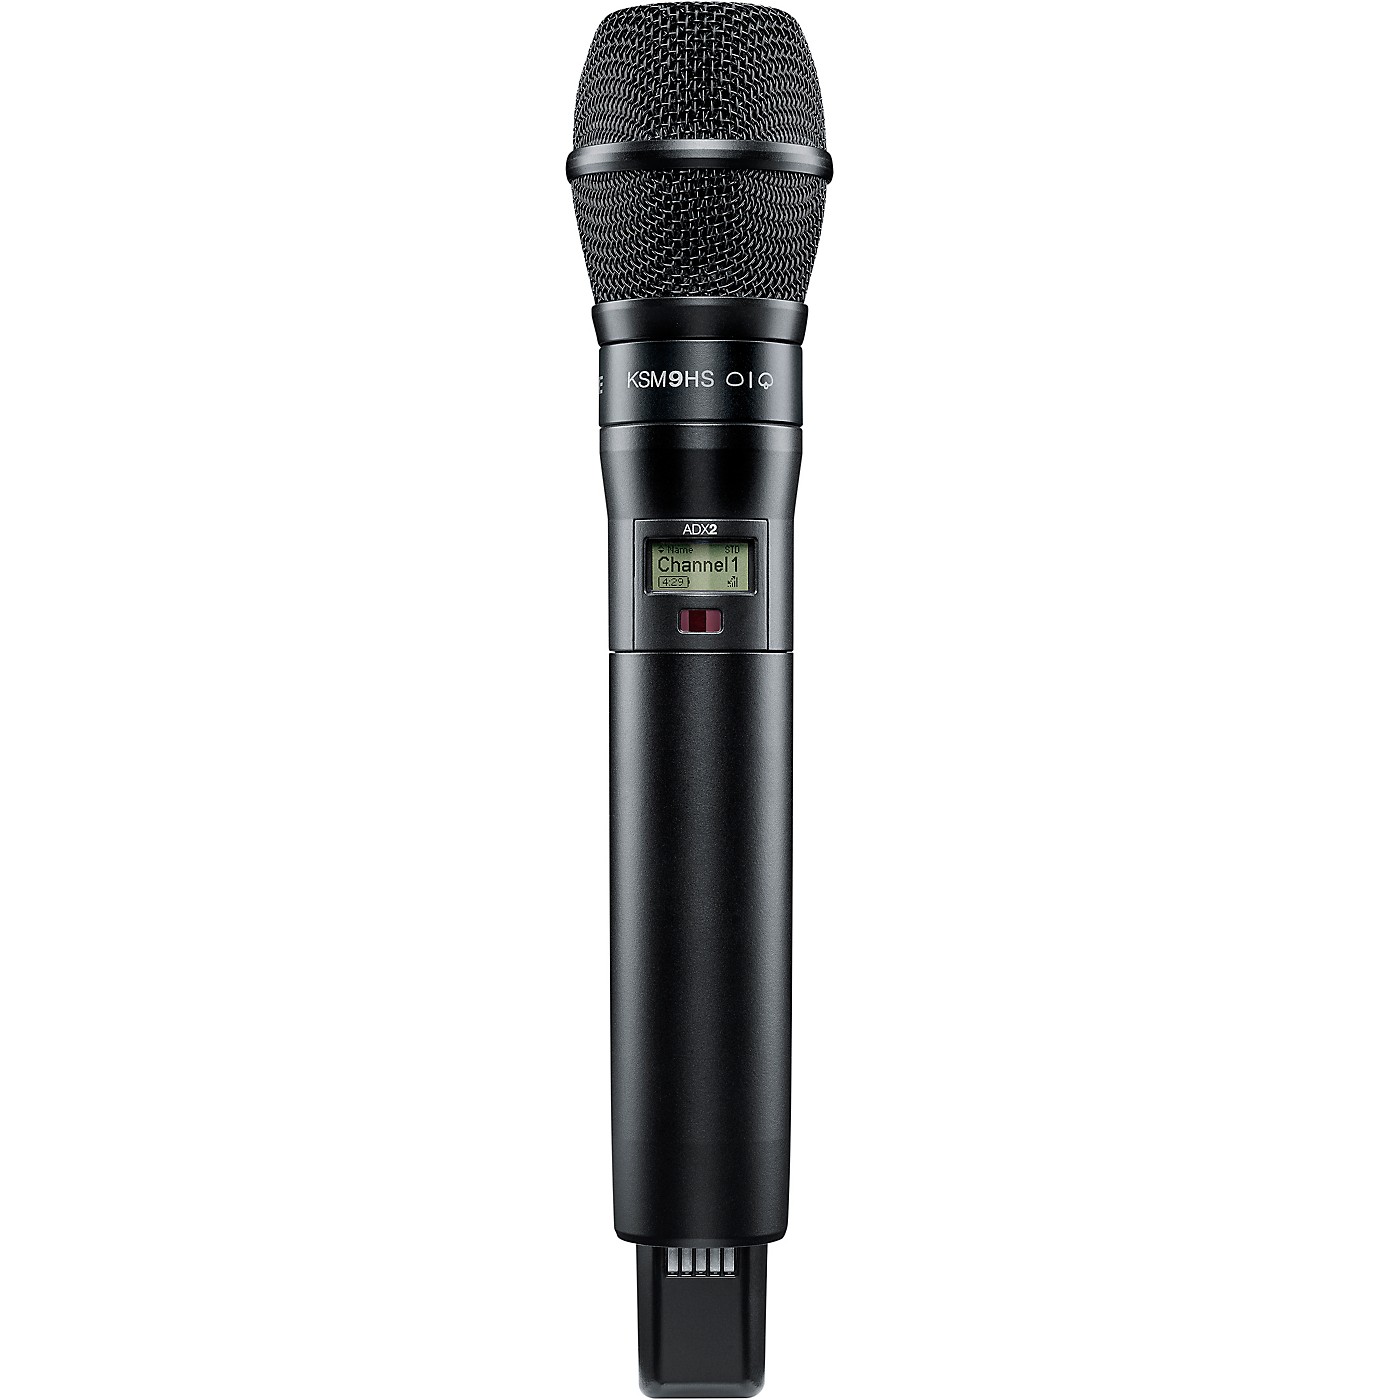 Shure Axient Digital ADX2/K9HSB Wireless Handheld Microphone Transmitter With KSM9HS Capsule in Black thumbnail